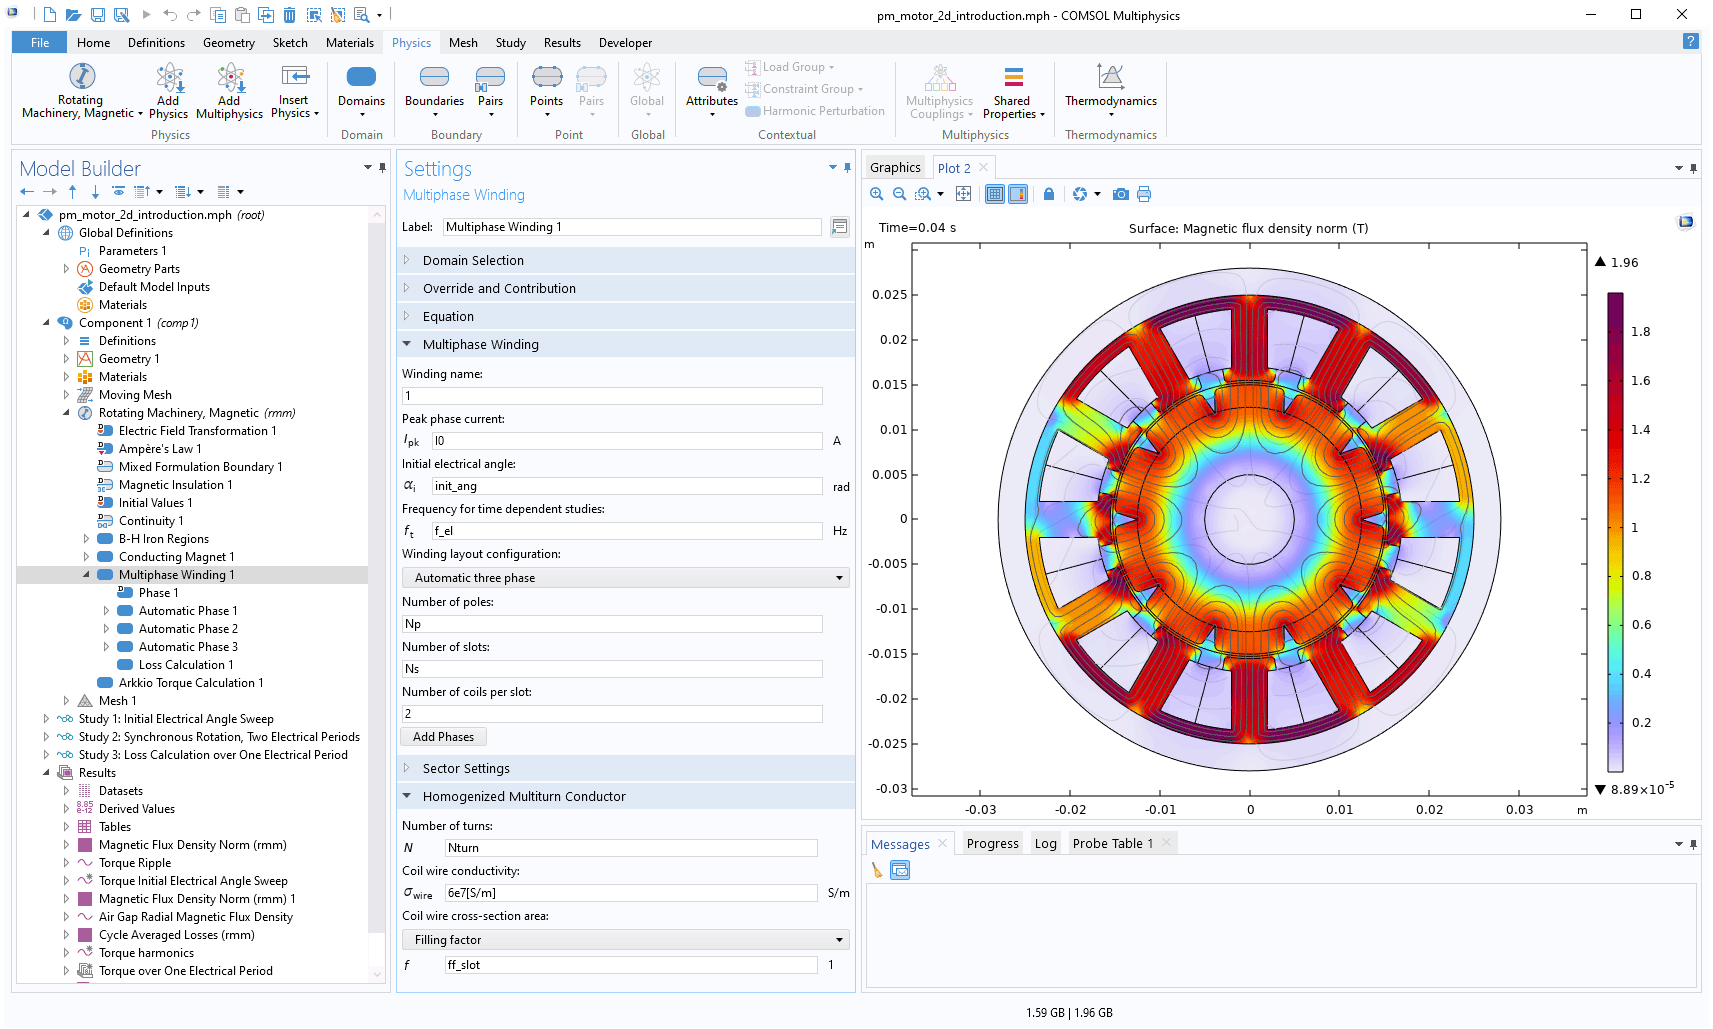 The COMSOL Multiphysics UI showing the Model Builder with the Multiphase Winding node highlighted, the corresponding Settings window, and a 2D motor model in the Graphics window.